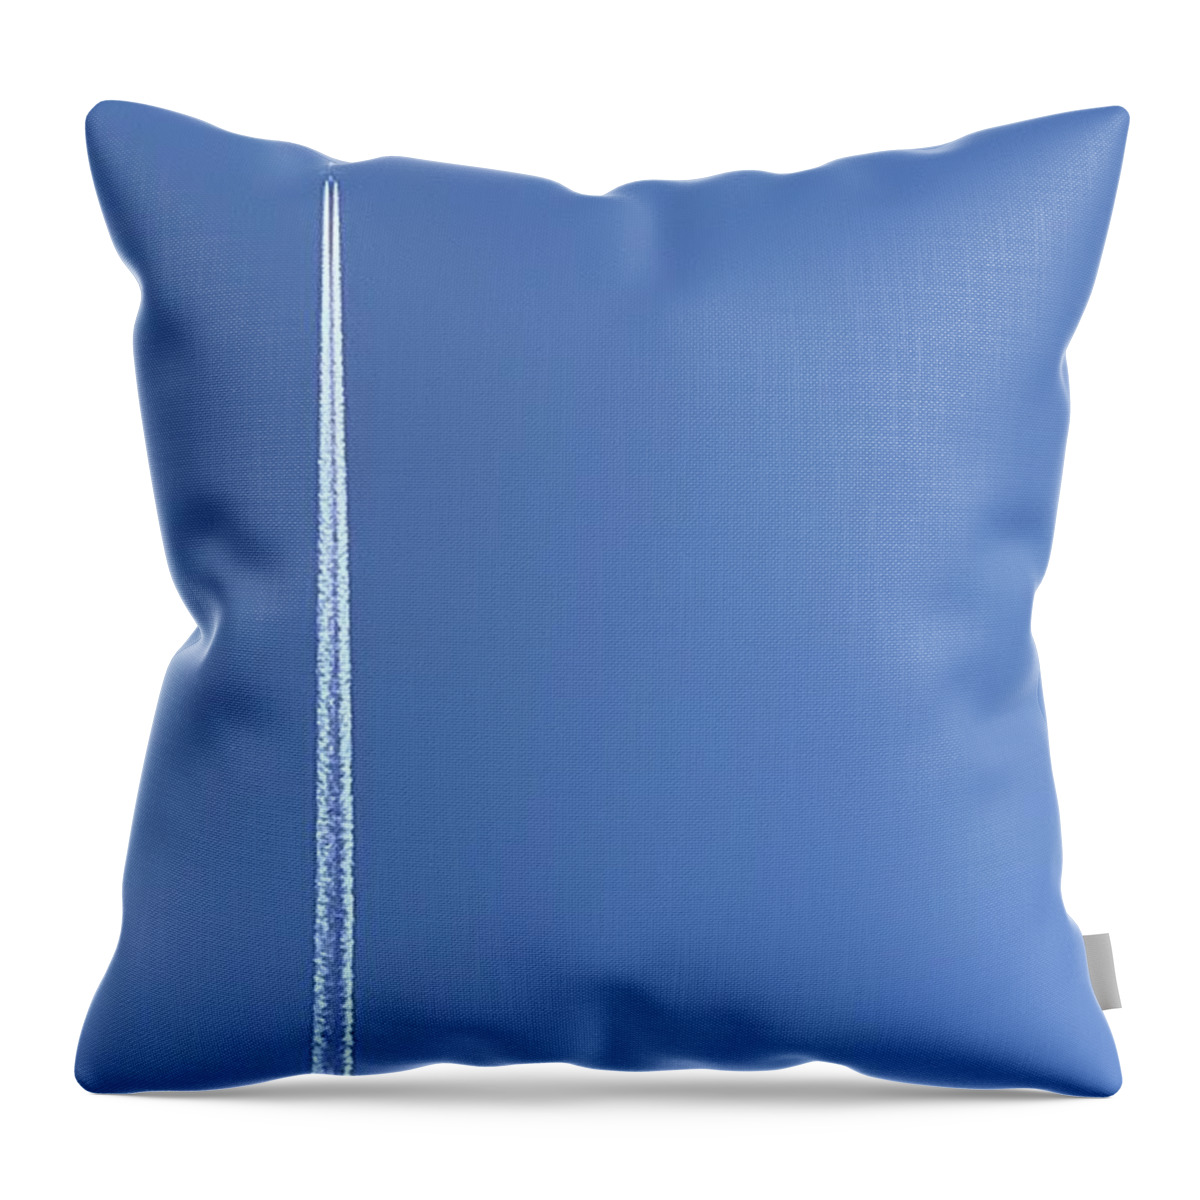 Sky Throw Pillow featuring the photograph Fly The Blue Skies by Louise Mingua